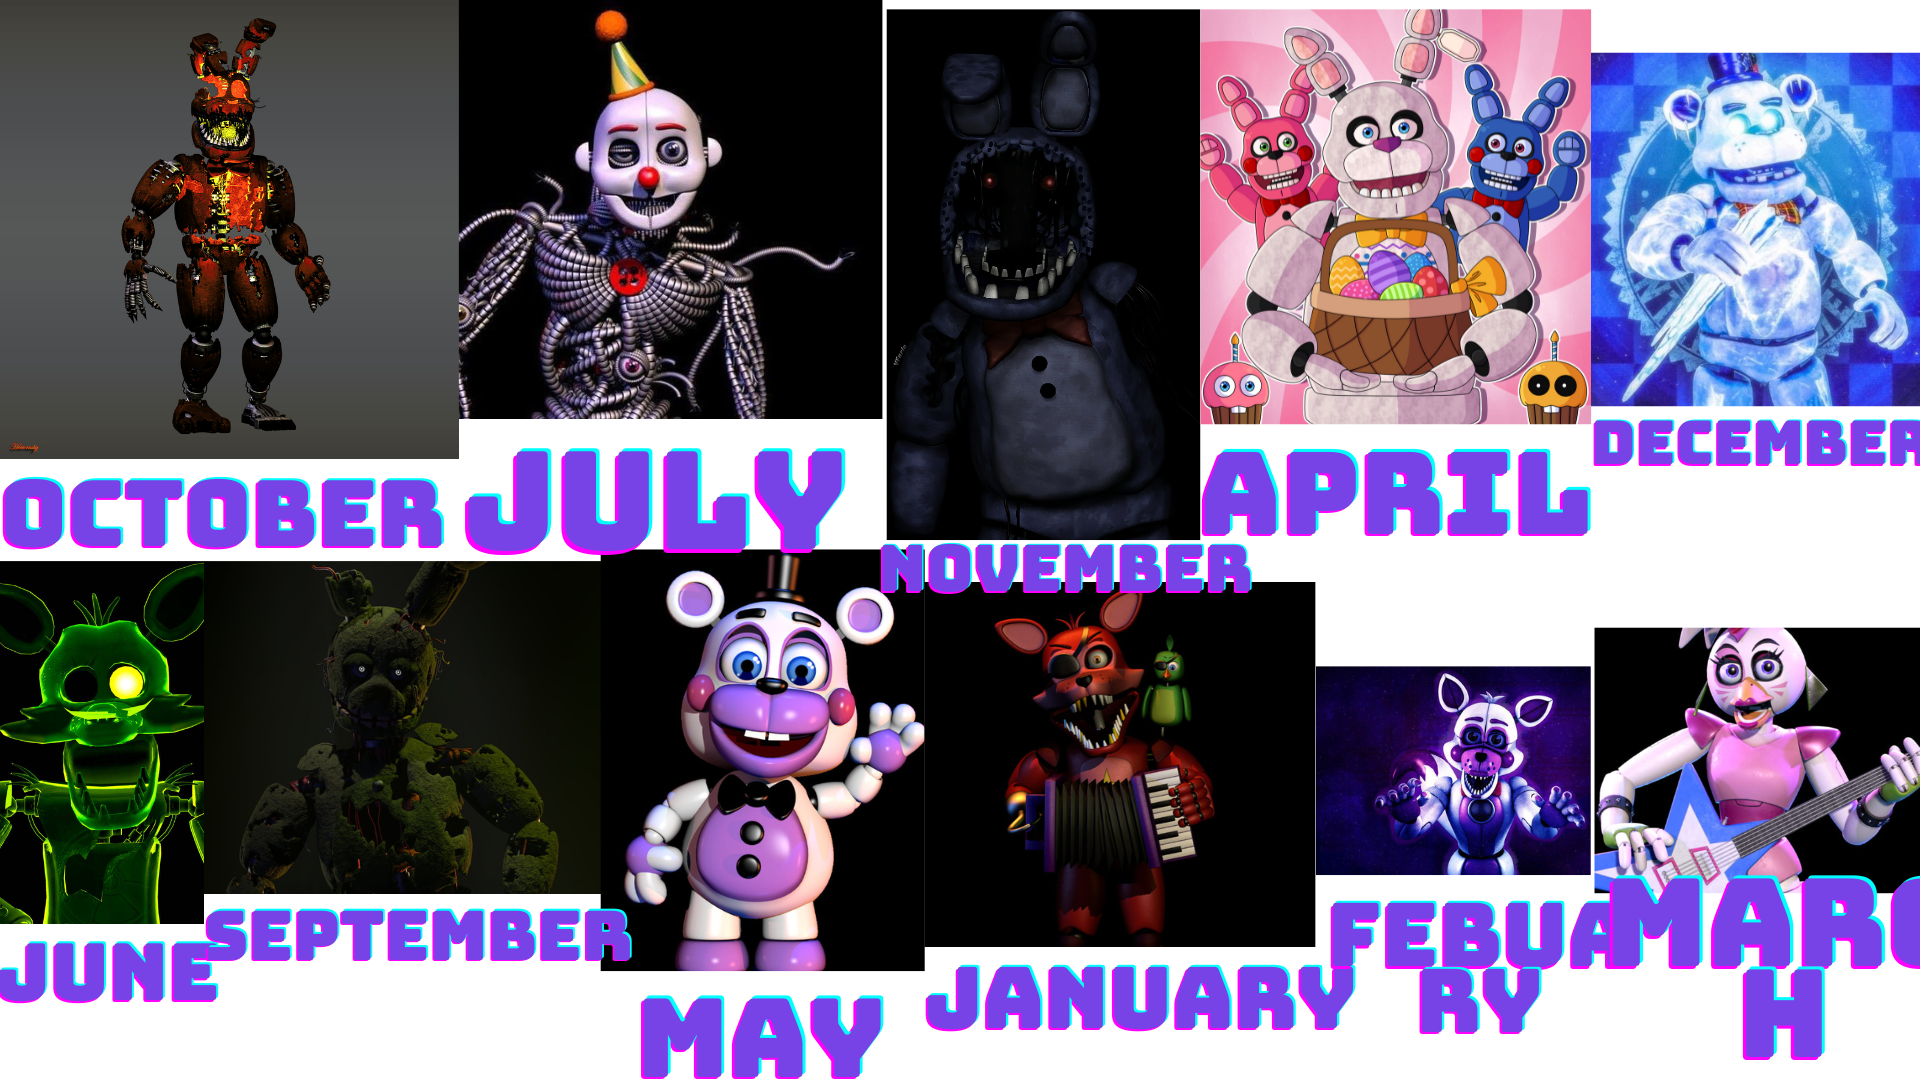 Here's a fnaf birthday game